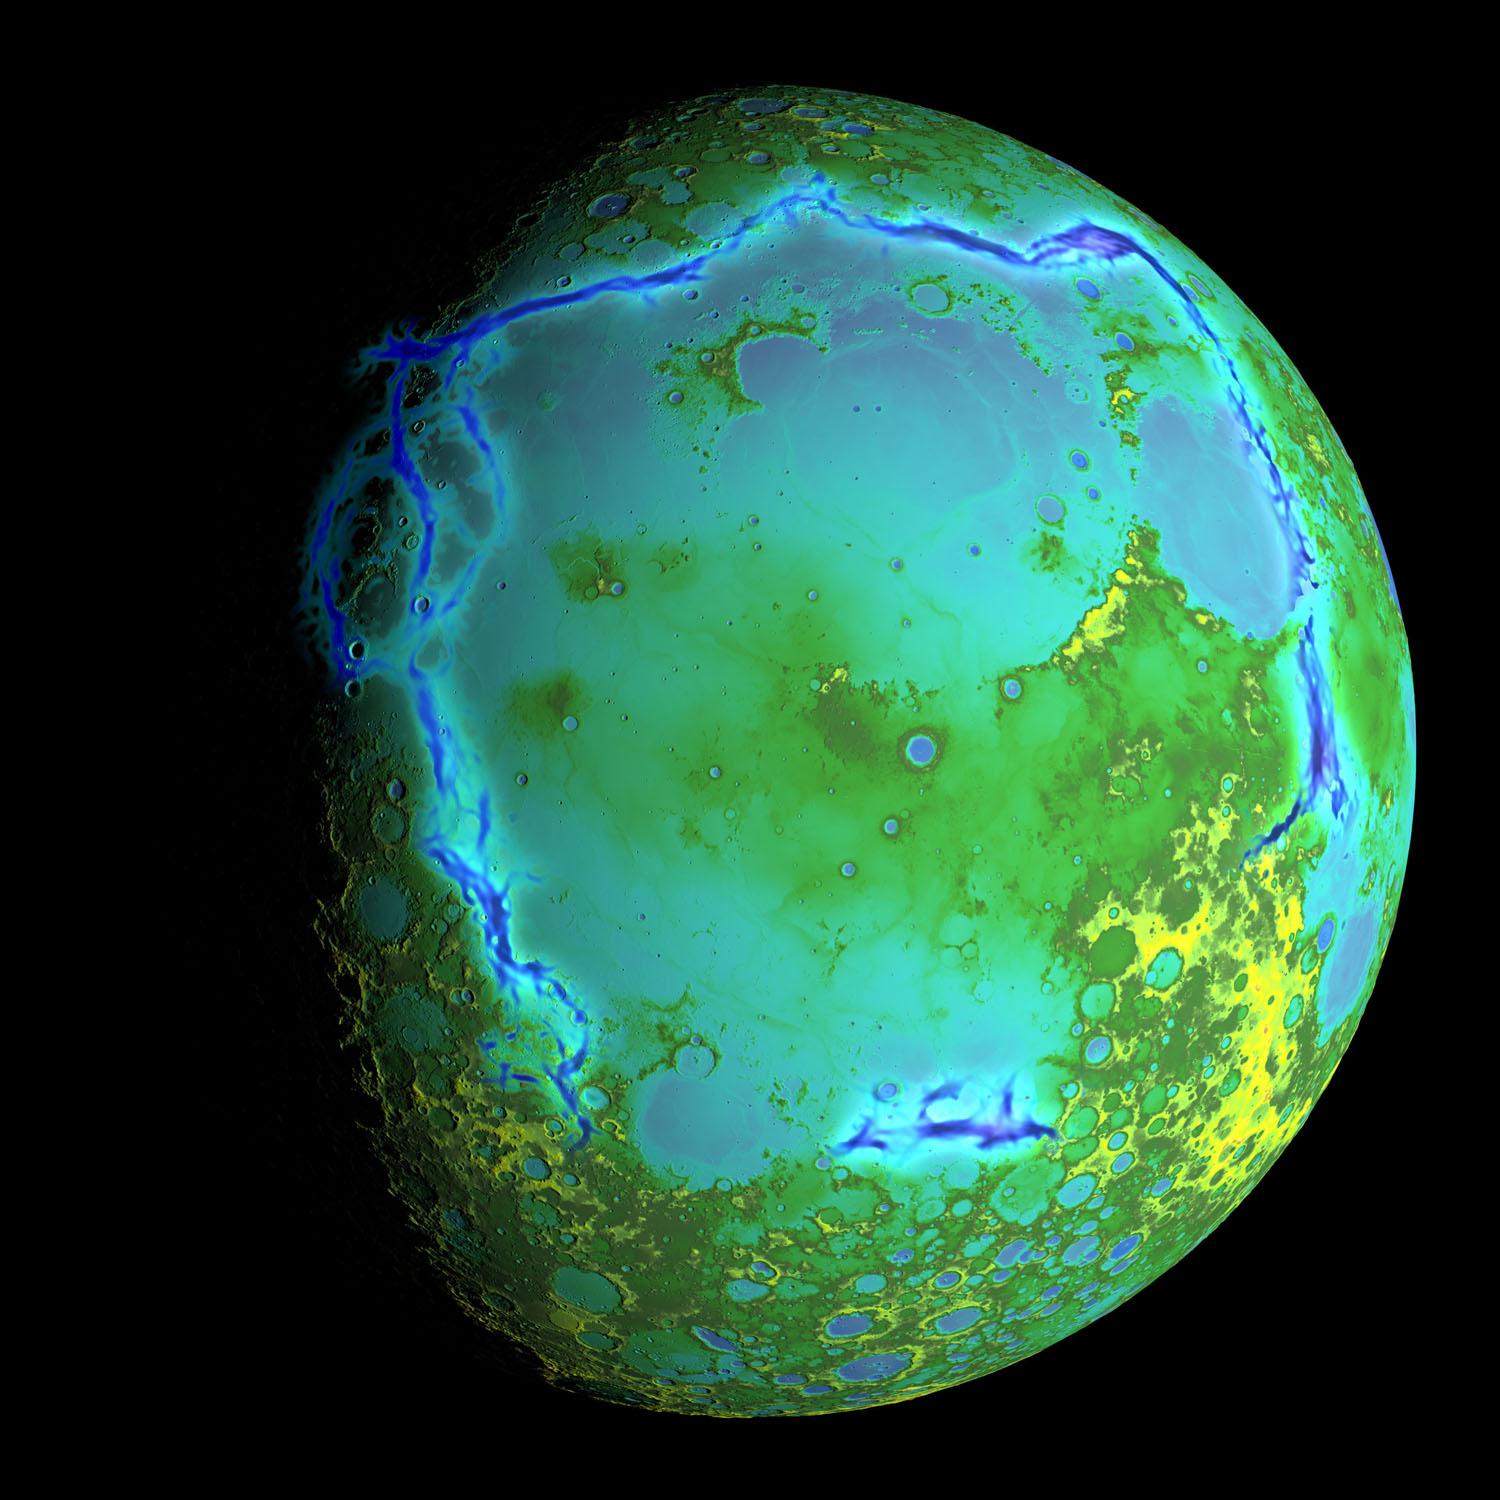 Image showing topography of the moon